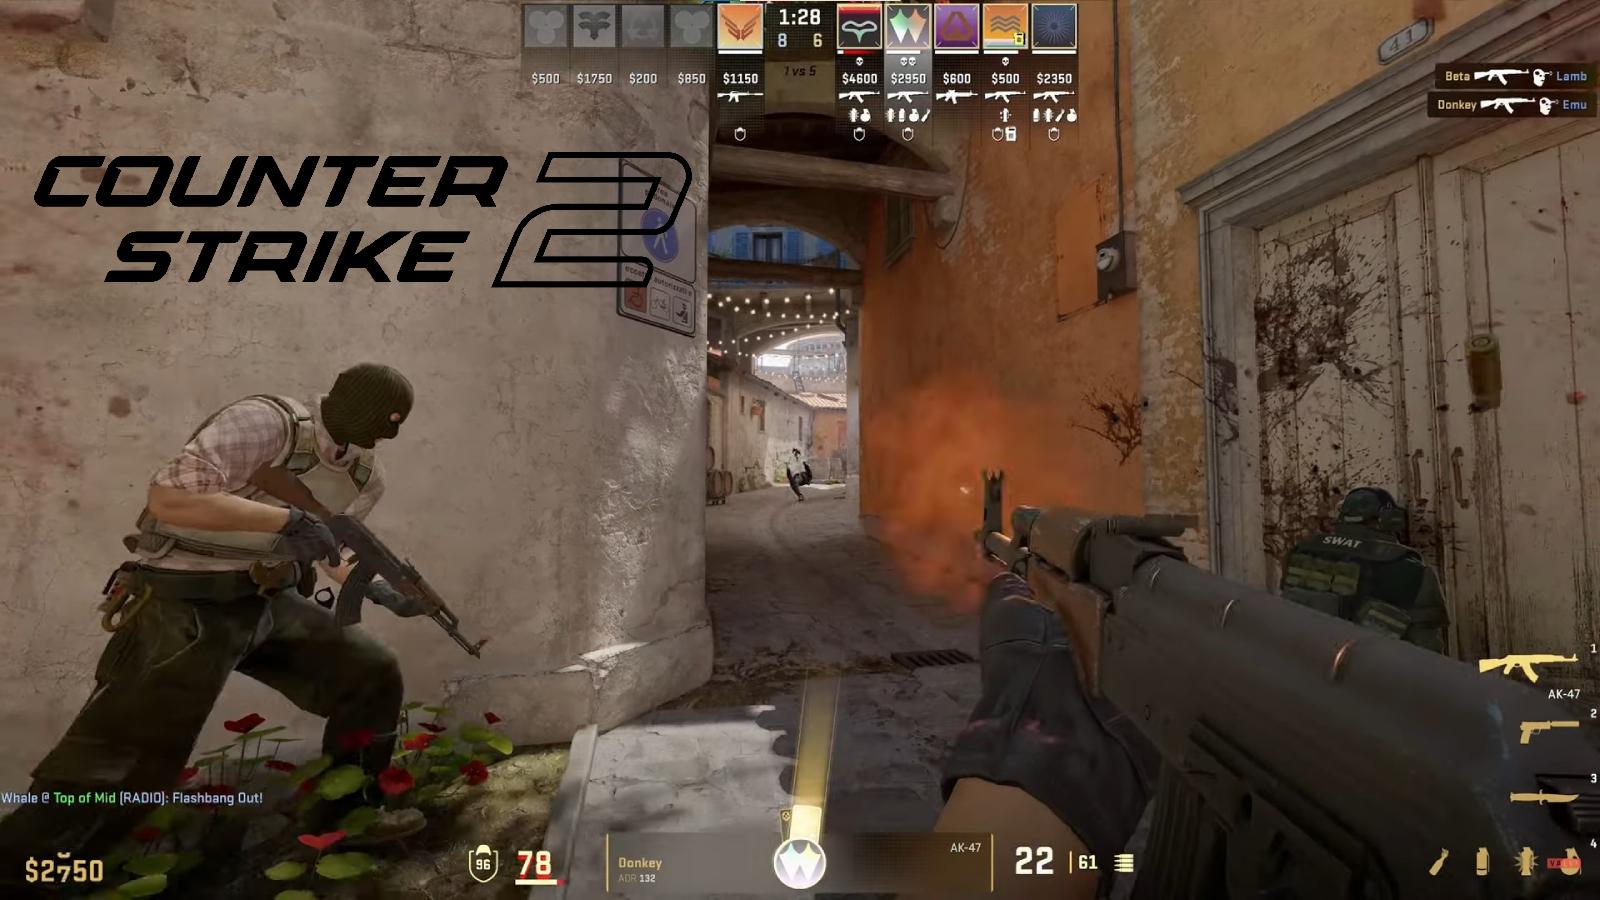 Counter-Strike 2 announced by Valve with playable test